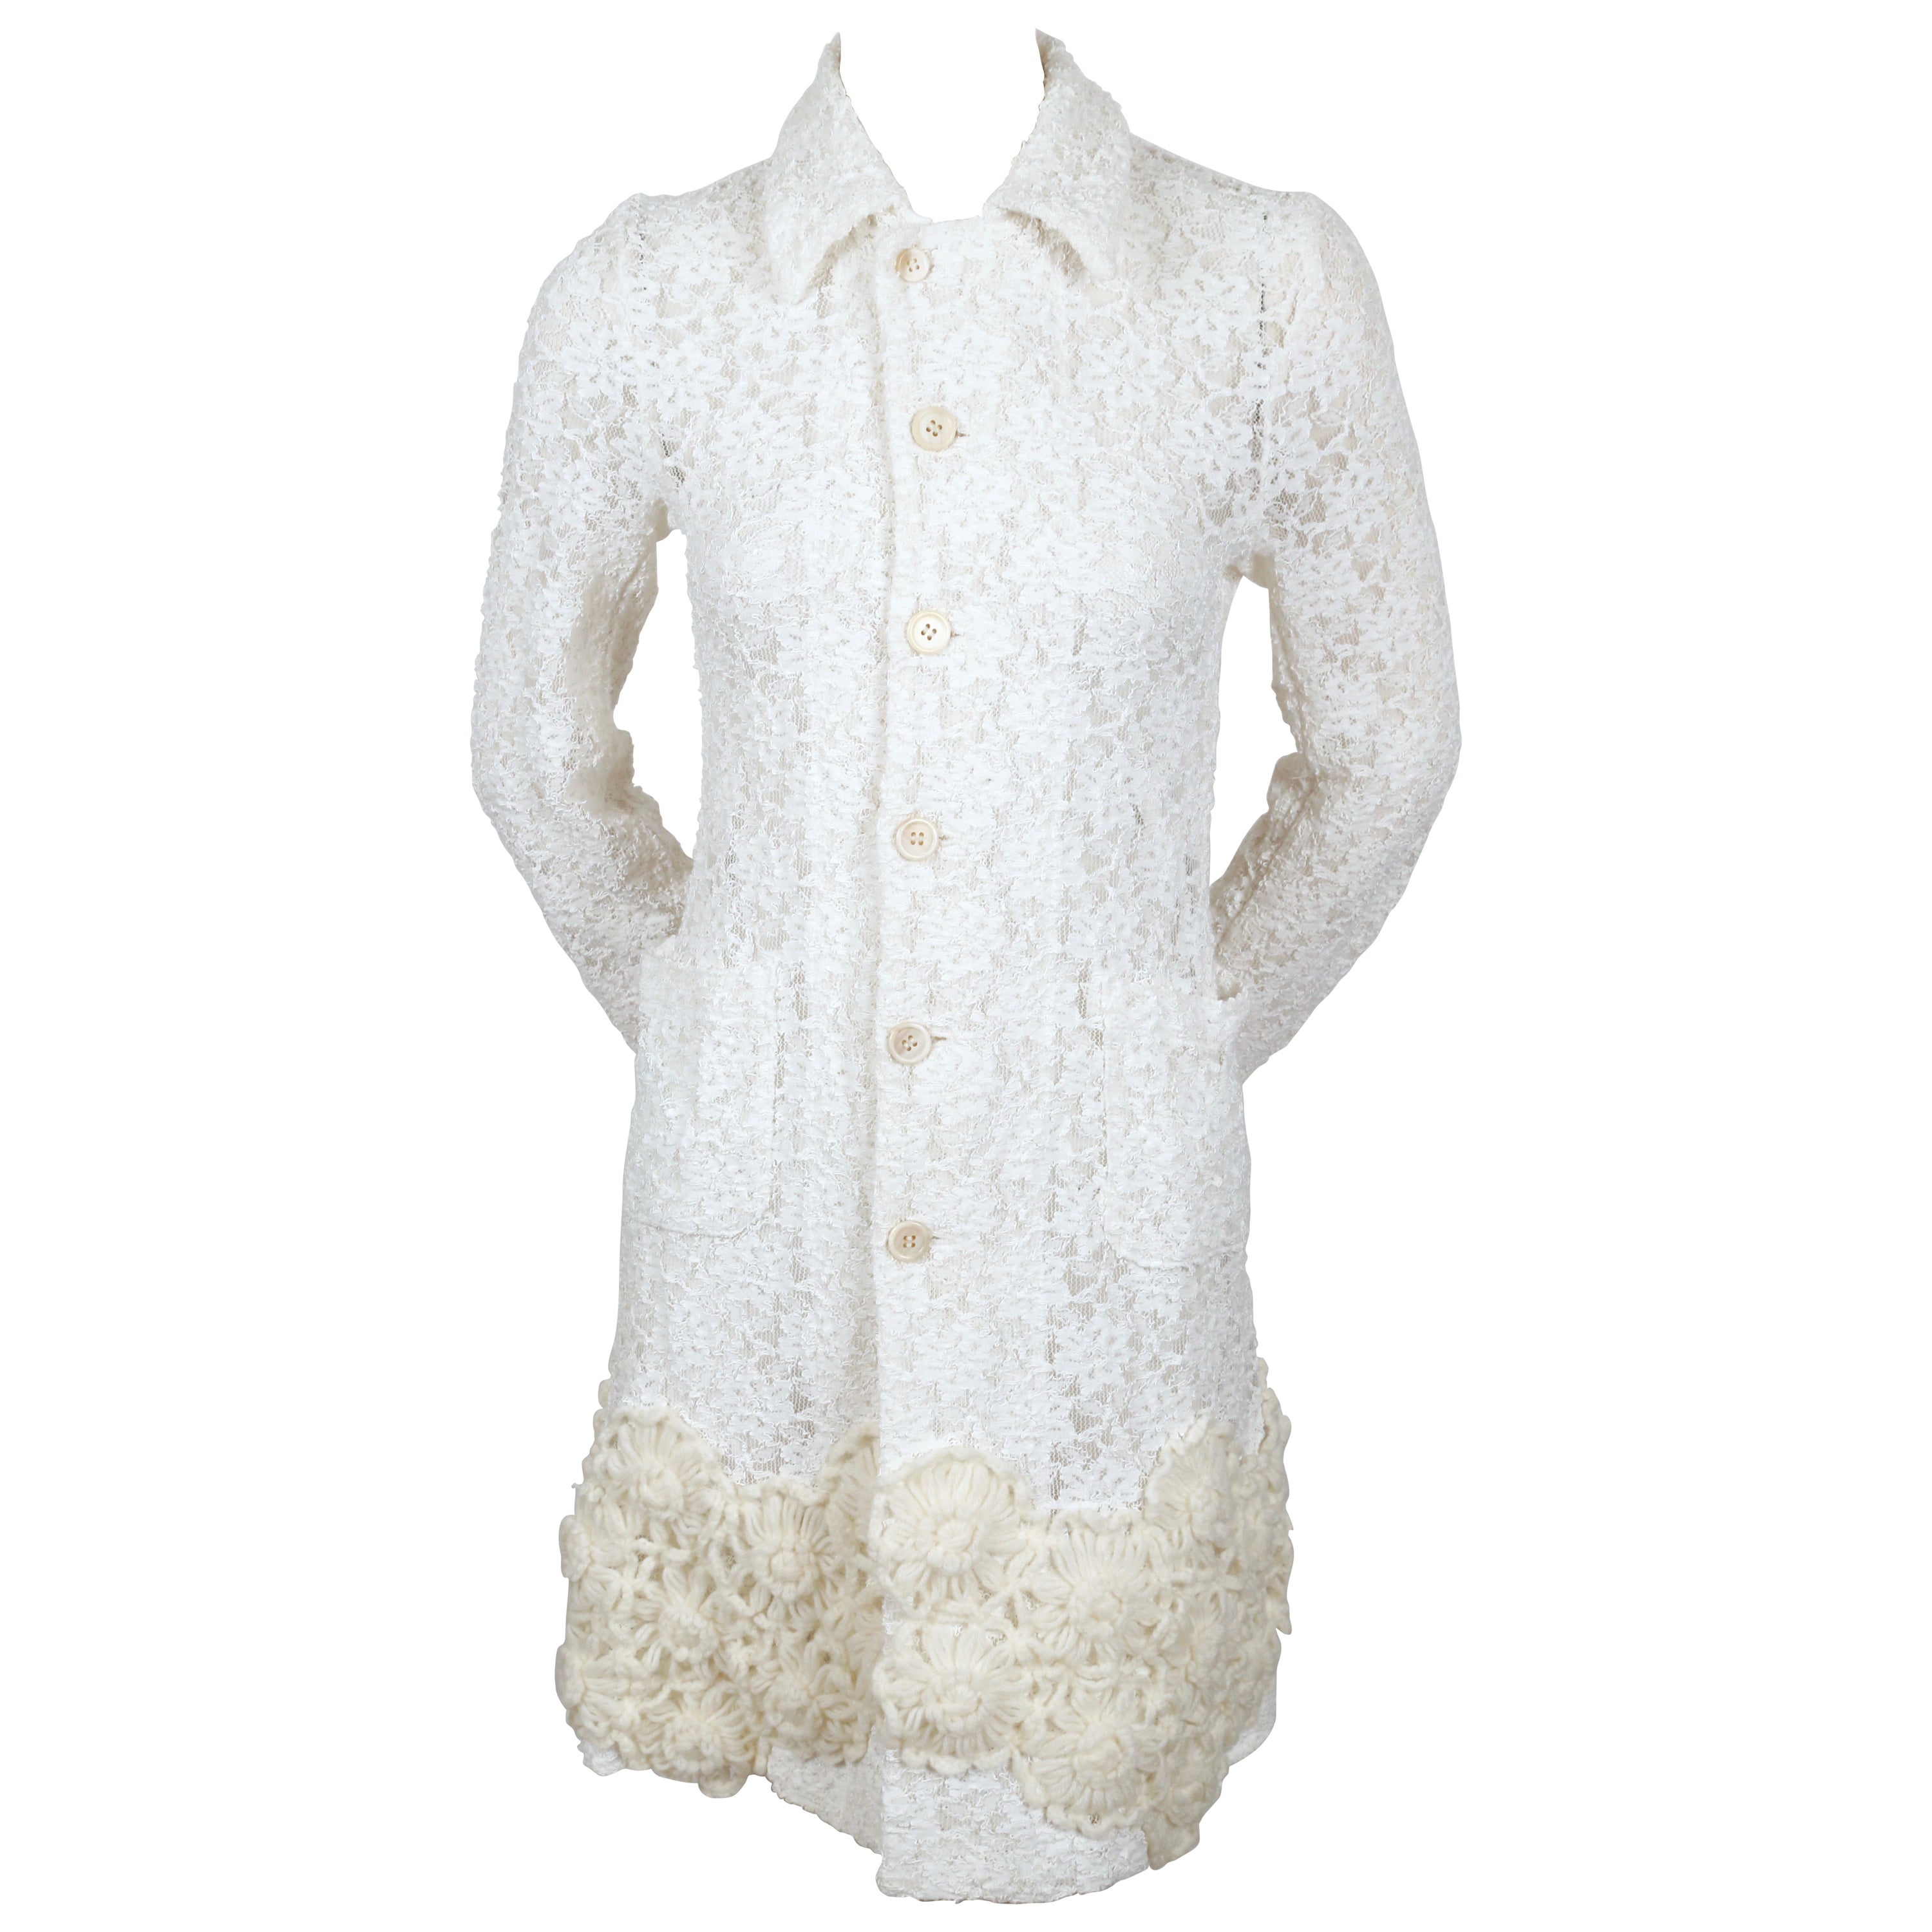 2012 COMME DES GARCONS off-white lace jacket with knit flower detail For Sale